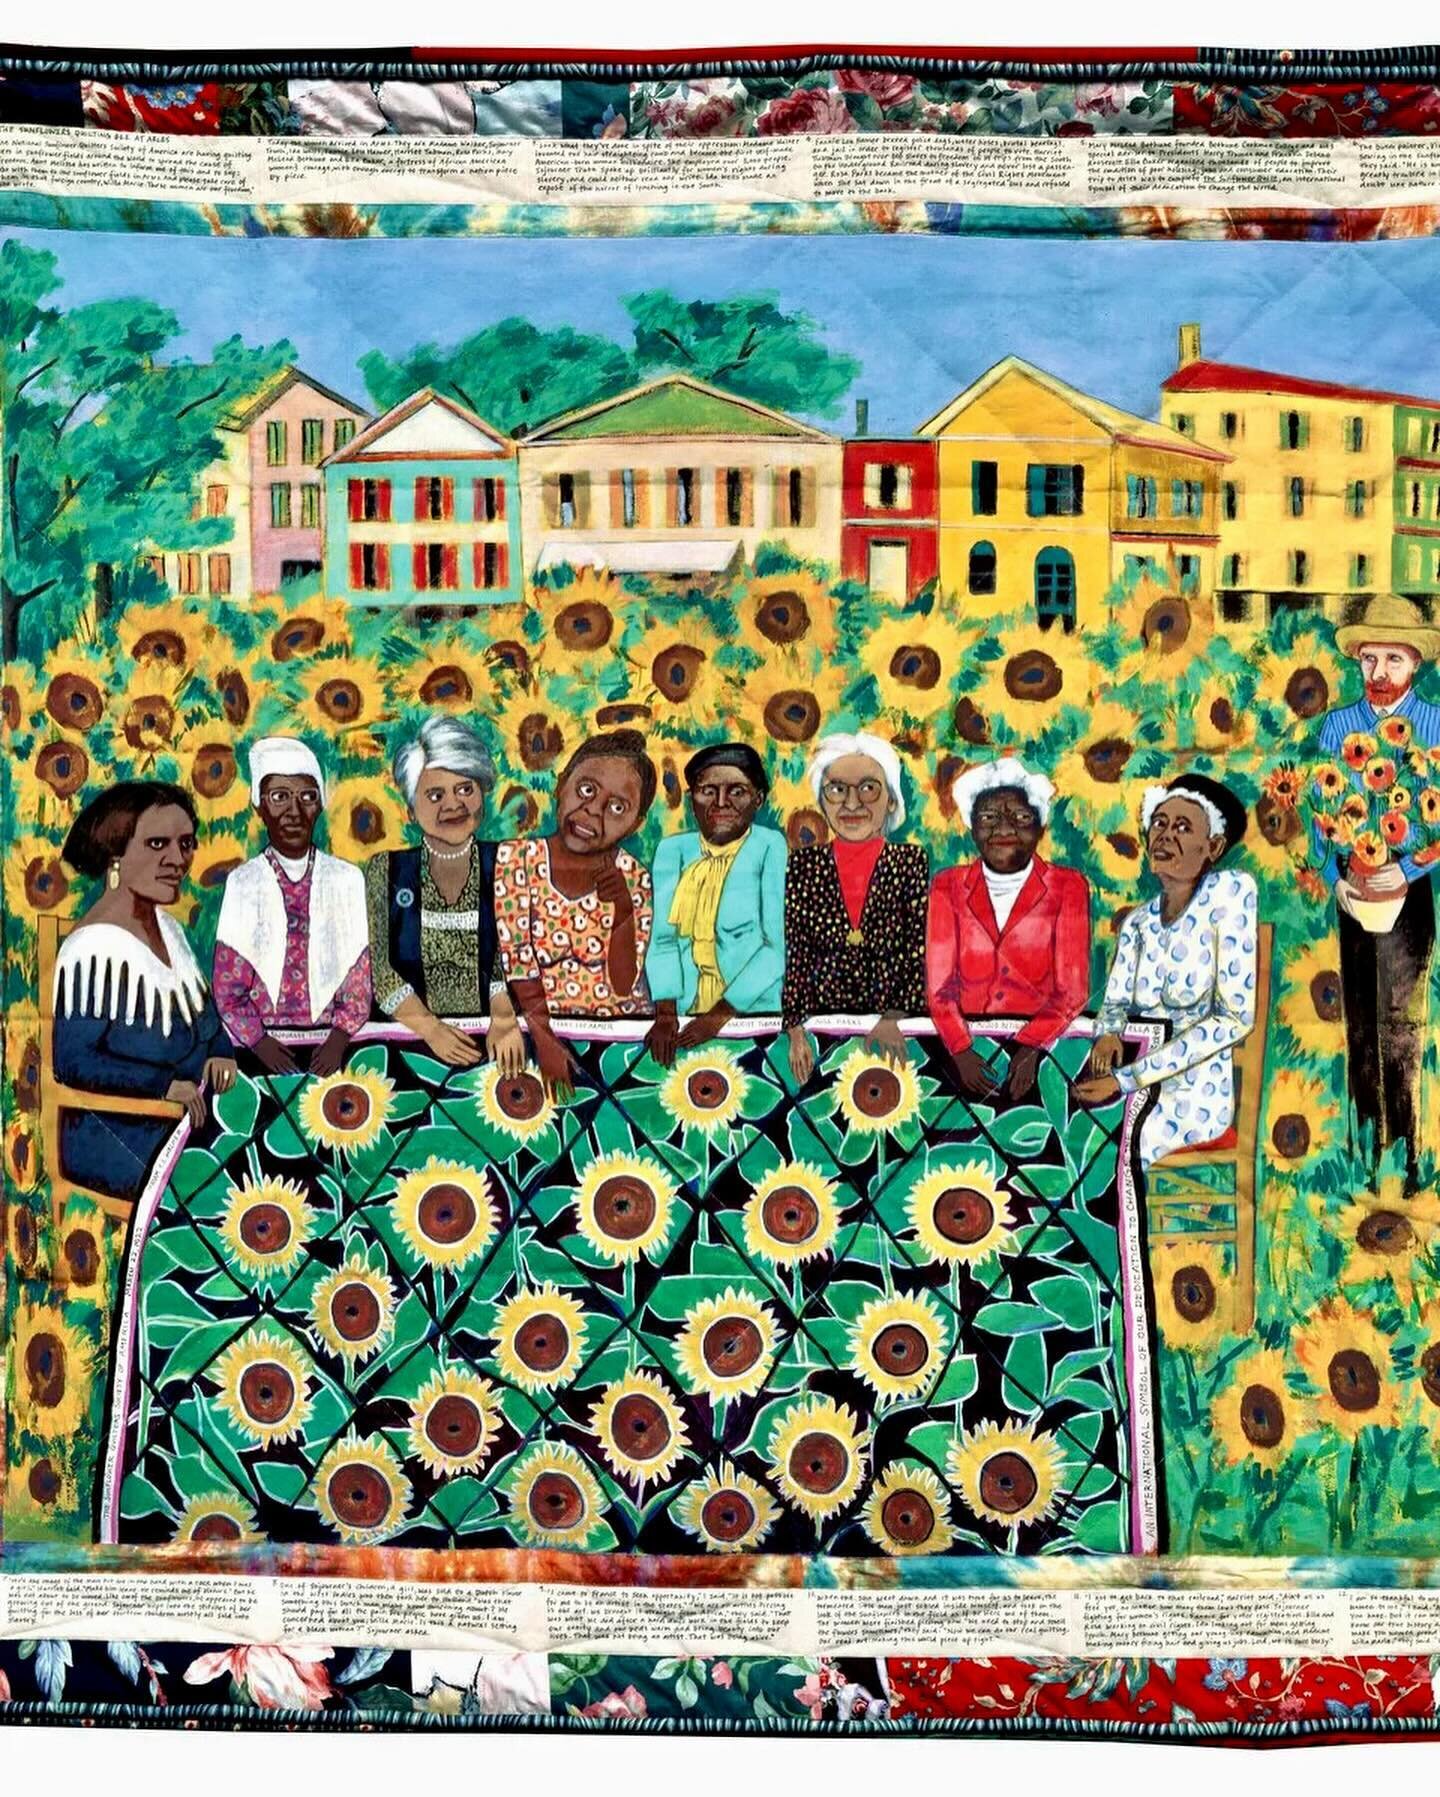 In honor of Dr. Martin Luther King Jr, our friends @mcachicago are celebrating MLK Day with a cool exhibit, Faith Ringgold: American People - it draws from her life as an artist and mom to amplify collective struggles for social justice and equity. F